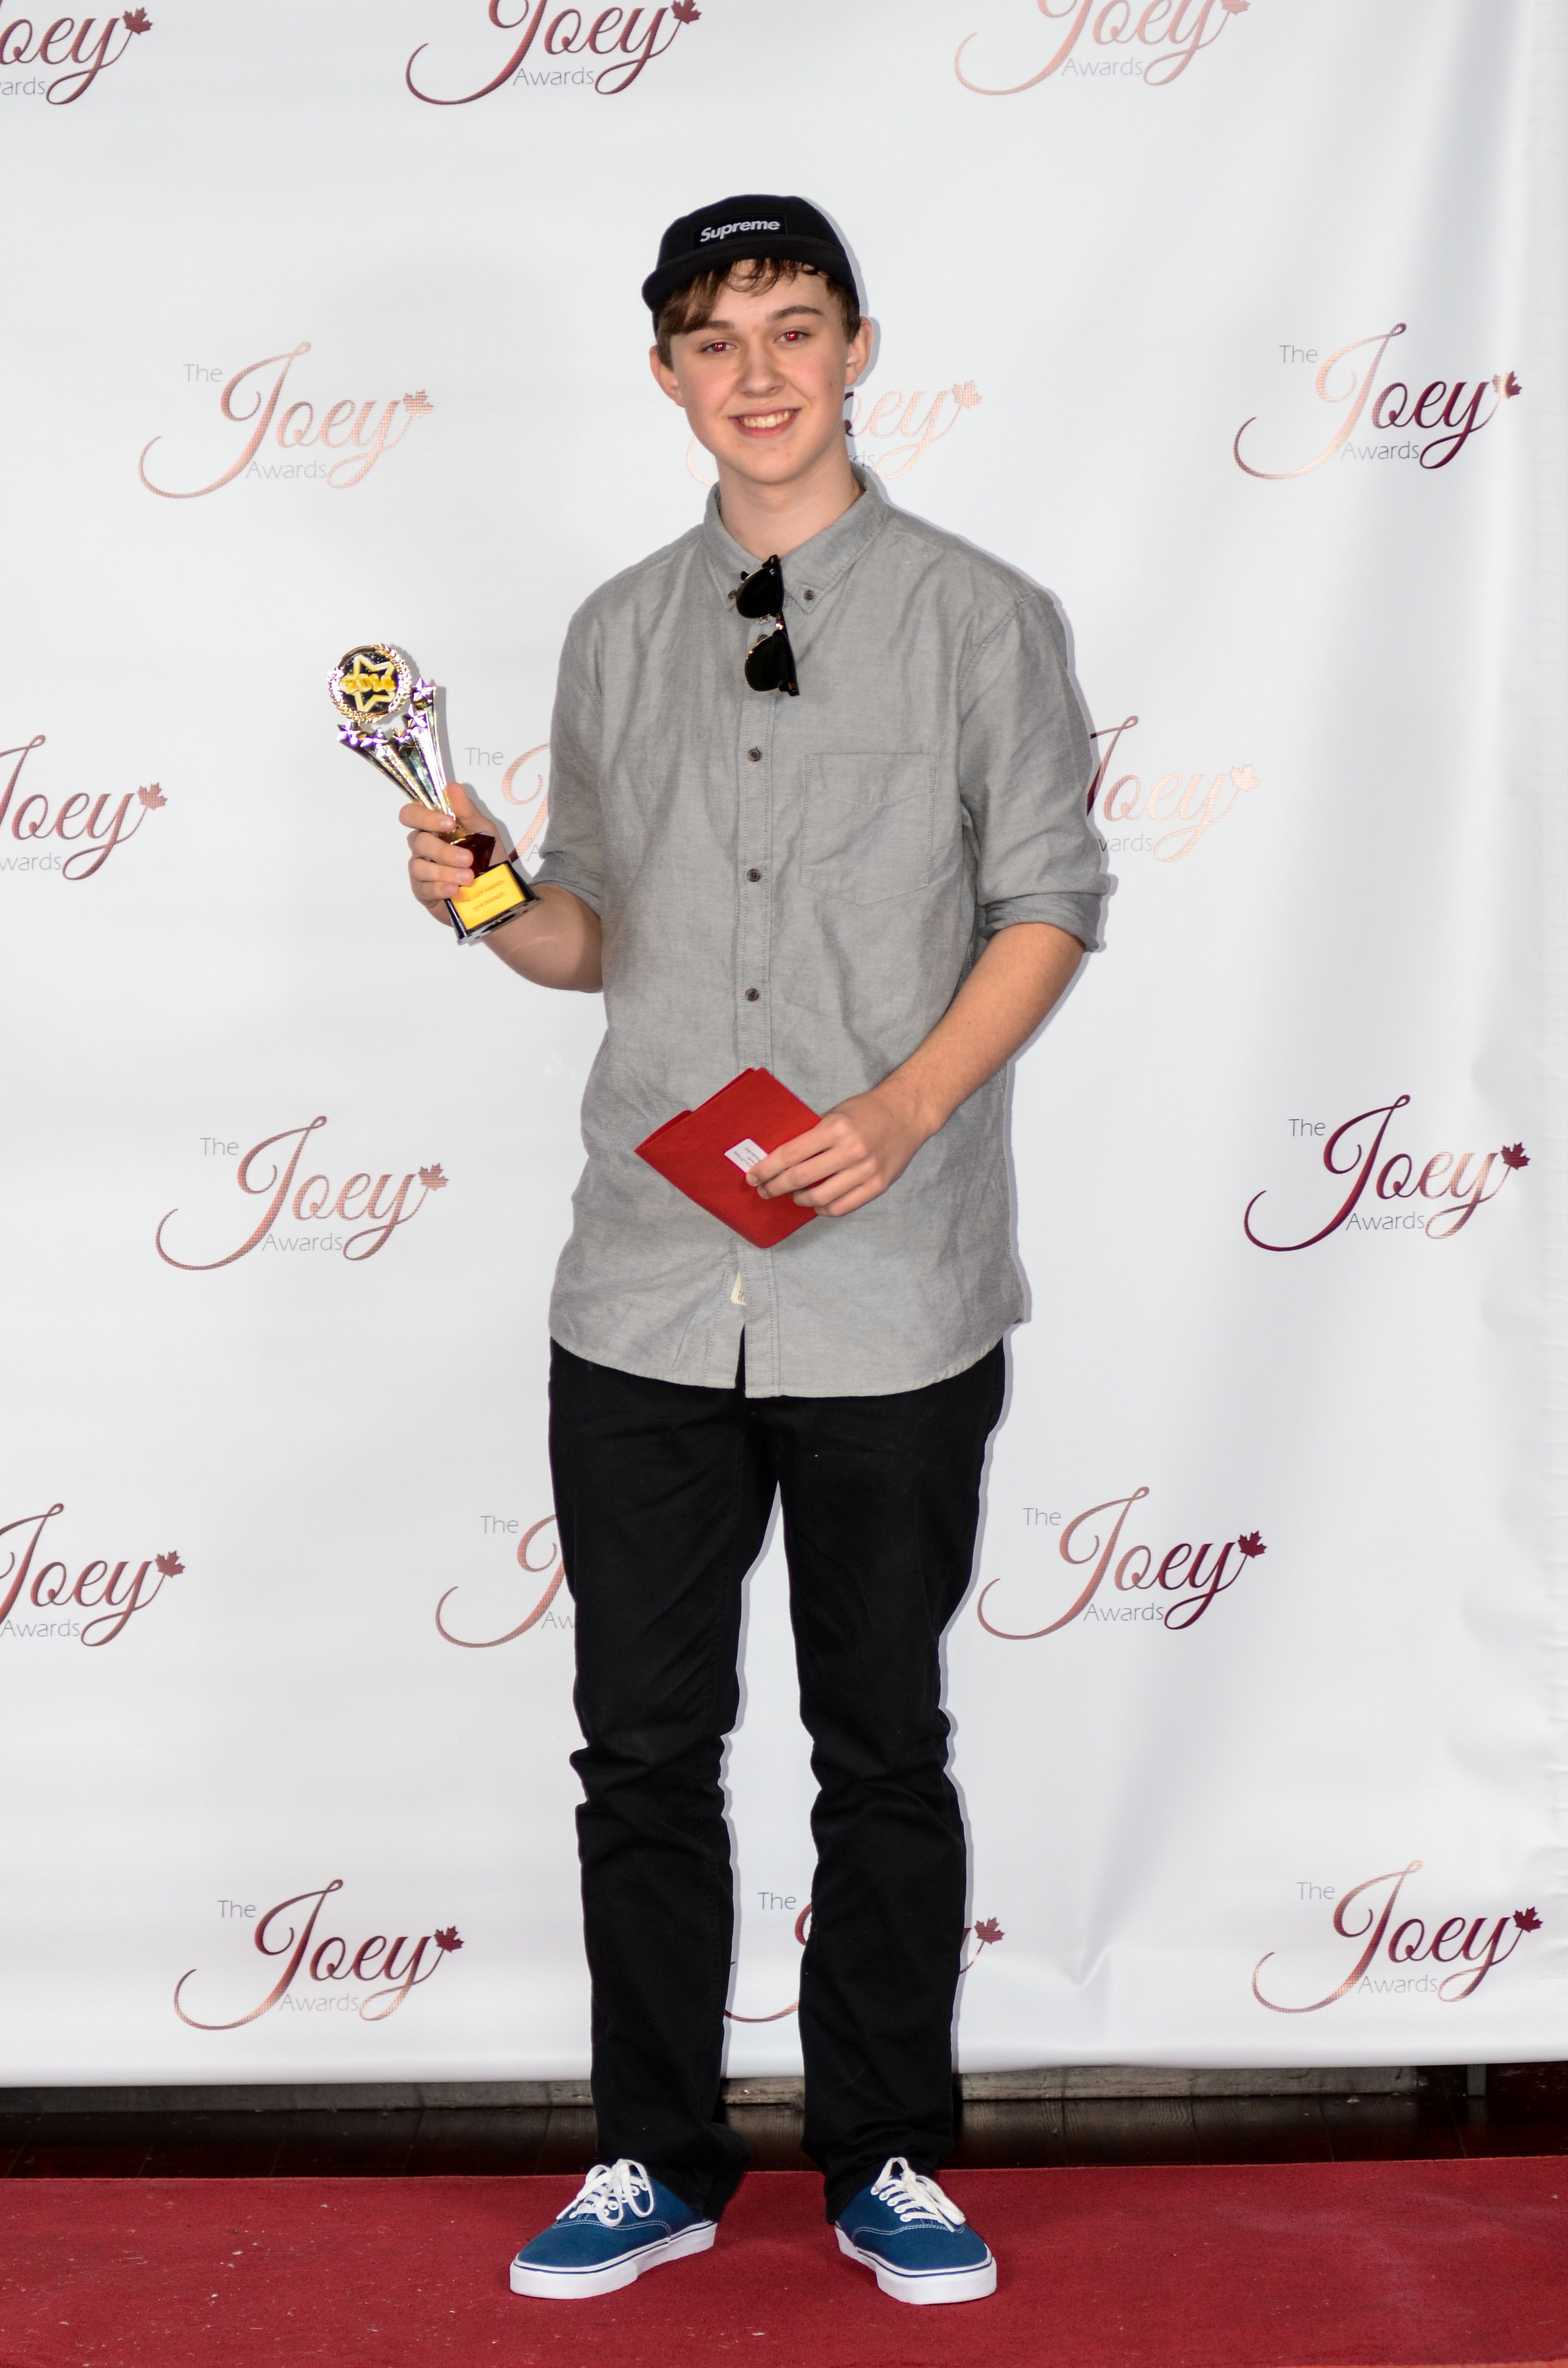 Joey Awards 2014, Vancouver Winner Young Actor in a Guest Starring role for 'When Calls the Heart'